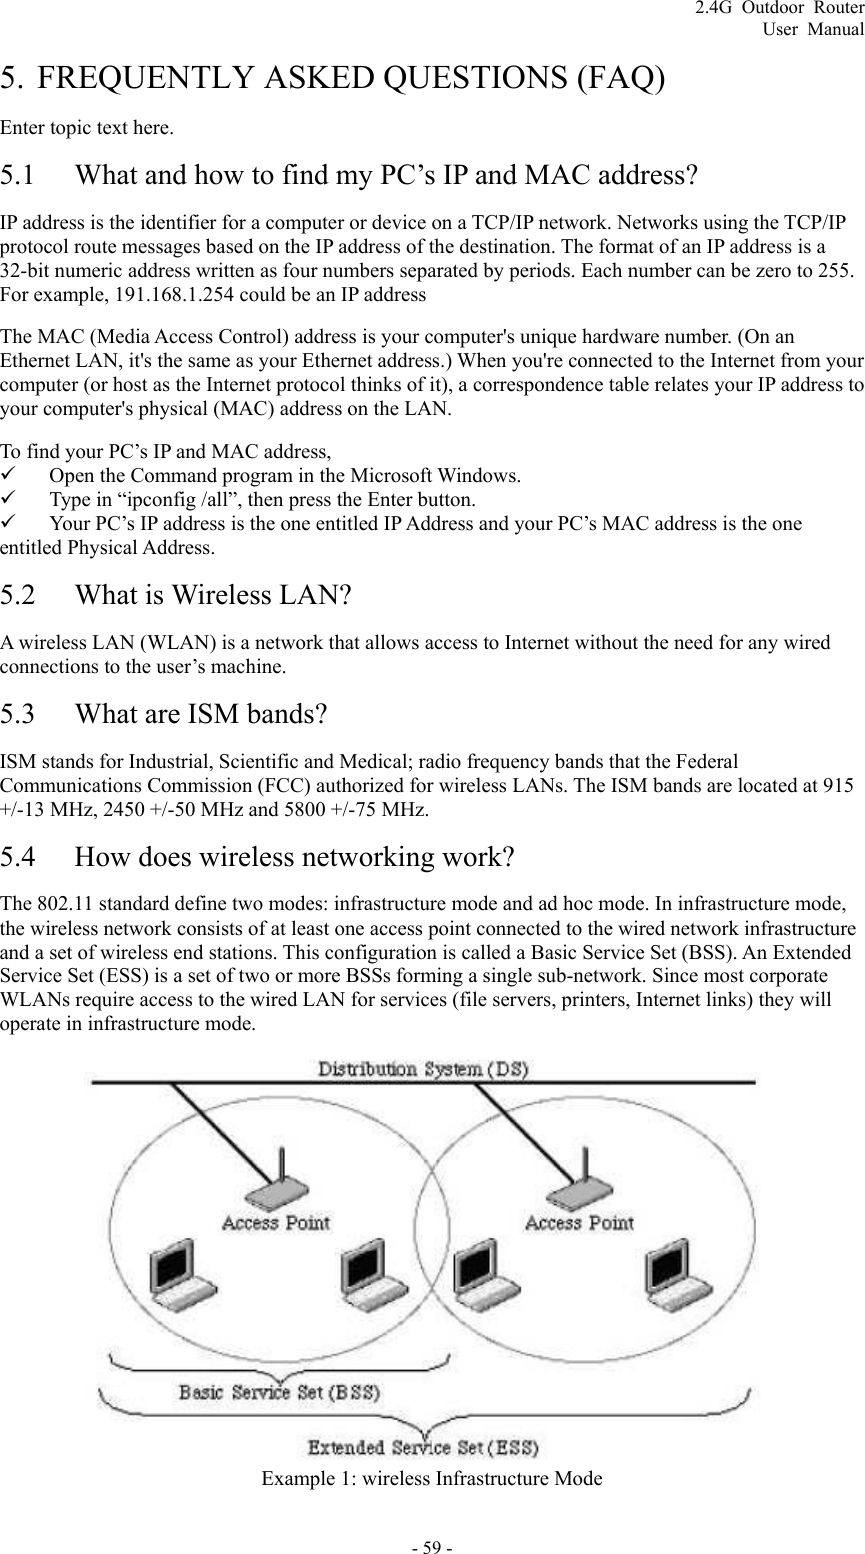 2.4G Outdoor Router User Manual 5. FREQUENTLY ASKED QUESTIONS (FAQ) Enter topic text here. 5.1 What and how to find my PC’s IP and MAC address? IP address is the identifier for a computer or device on a TCP/IP network. Networks using the TCP/IP protocol route messages based on the IP address of the destination. The format of an IP address is a 32-bit numeric address written as four numbers separated by periods. Each number can be zero to 255. For example, 191.168.1.254 could be an IP address The MAC (Media Access Control) address is your computer&apos;s unique hardware number. (On an Ethernet LAN, it&apos;s the same as your Ethernet address.) When you&apos;re connected to the Internet from your computer (or host as the Internet protocol thinks of it), a correspondence table relates your IP address to your computer&apos;s physical (MAC) address on the LAN.   To find your PC’s IP and MAC address,   9 Open the Command program in the Microsoft Windows.   9 Type in “ipconfig /all”, then press the Enter button.   9 Your PC’s IP address is the one entitled IP Address and your PC’s MAC address is the one entitled Physical Address. 5.2 What is Wireless LAN? A wireless LAN (WLAN) is a network that allows access to Internet without the need for any wired connections to the user’s machine.   5.3 What are ISM bands? ISM stands for Industrial, Scientific and Medical; radio frequency bands that the Federal Communications Commission (FCC) authorized for wireless LANs. The ISM bands are located at 915 +/-13 MHz, 2450 +/-50 MHz and 5800 +/-75 MHz. 5.4 How does wireless networking work? The 802.11 standard define two modes: infrastructure mode and ad hoc mode. In infrastructure mode, the wireless network consists of at least one access point connected to the wired network infrastructure and a set of wireless end stations. This configuration is called a Basic Service Set (BSS). An Extended Service Set (ESS) is a set of two or more BSSs forming a single sub-network. Since most corporate WLANs require access to the wired LAN for services (file servers, printers, Internet links) they will operate in infrastructure mode.   Example 1: wireless Infrastructure Mode - 59 - 